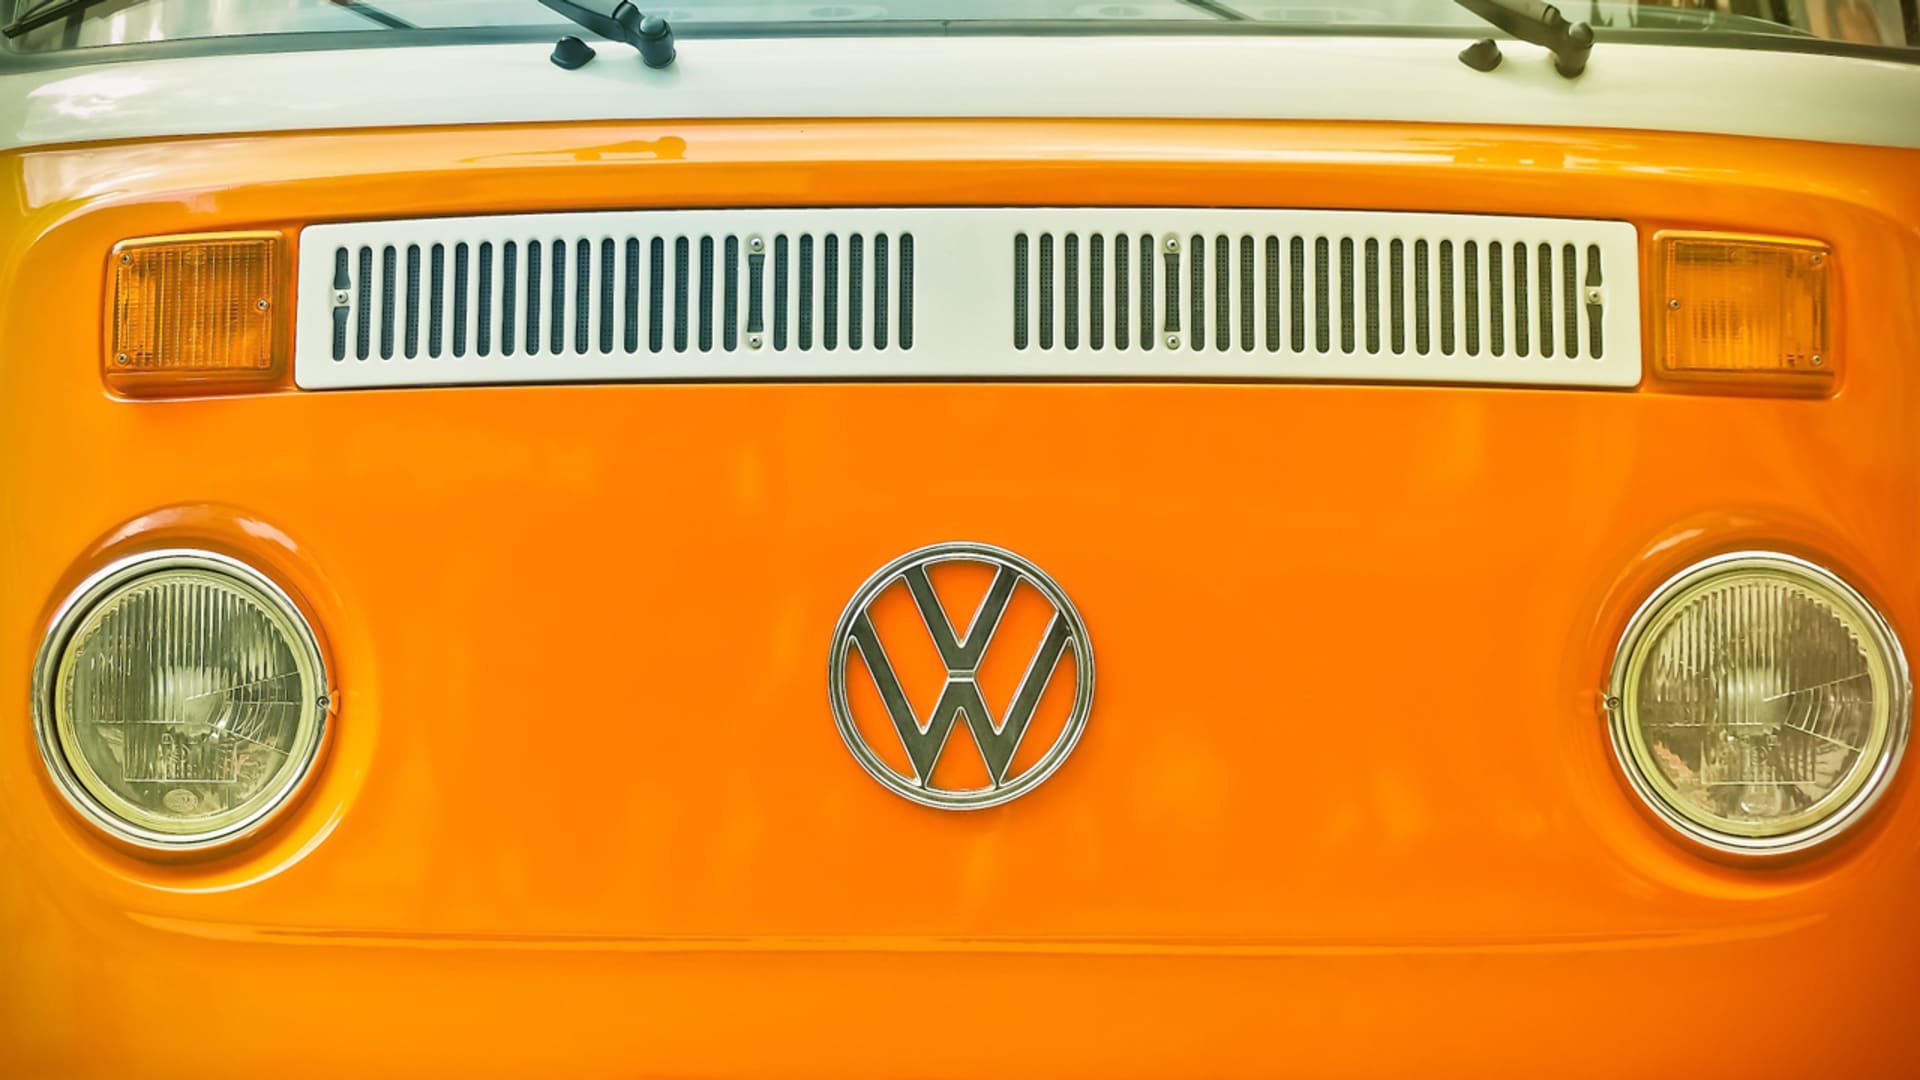 Volkswagen announces it will end animal experiments